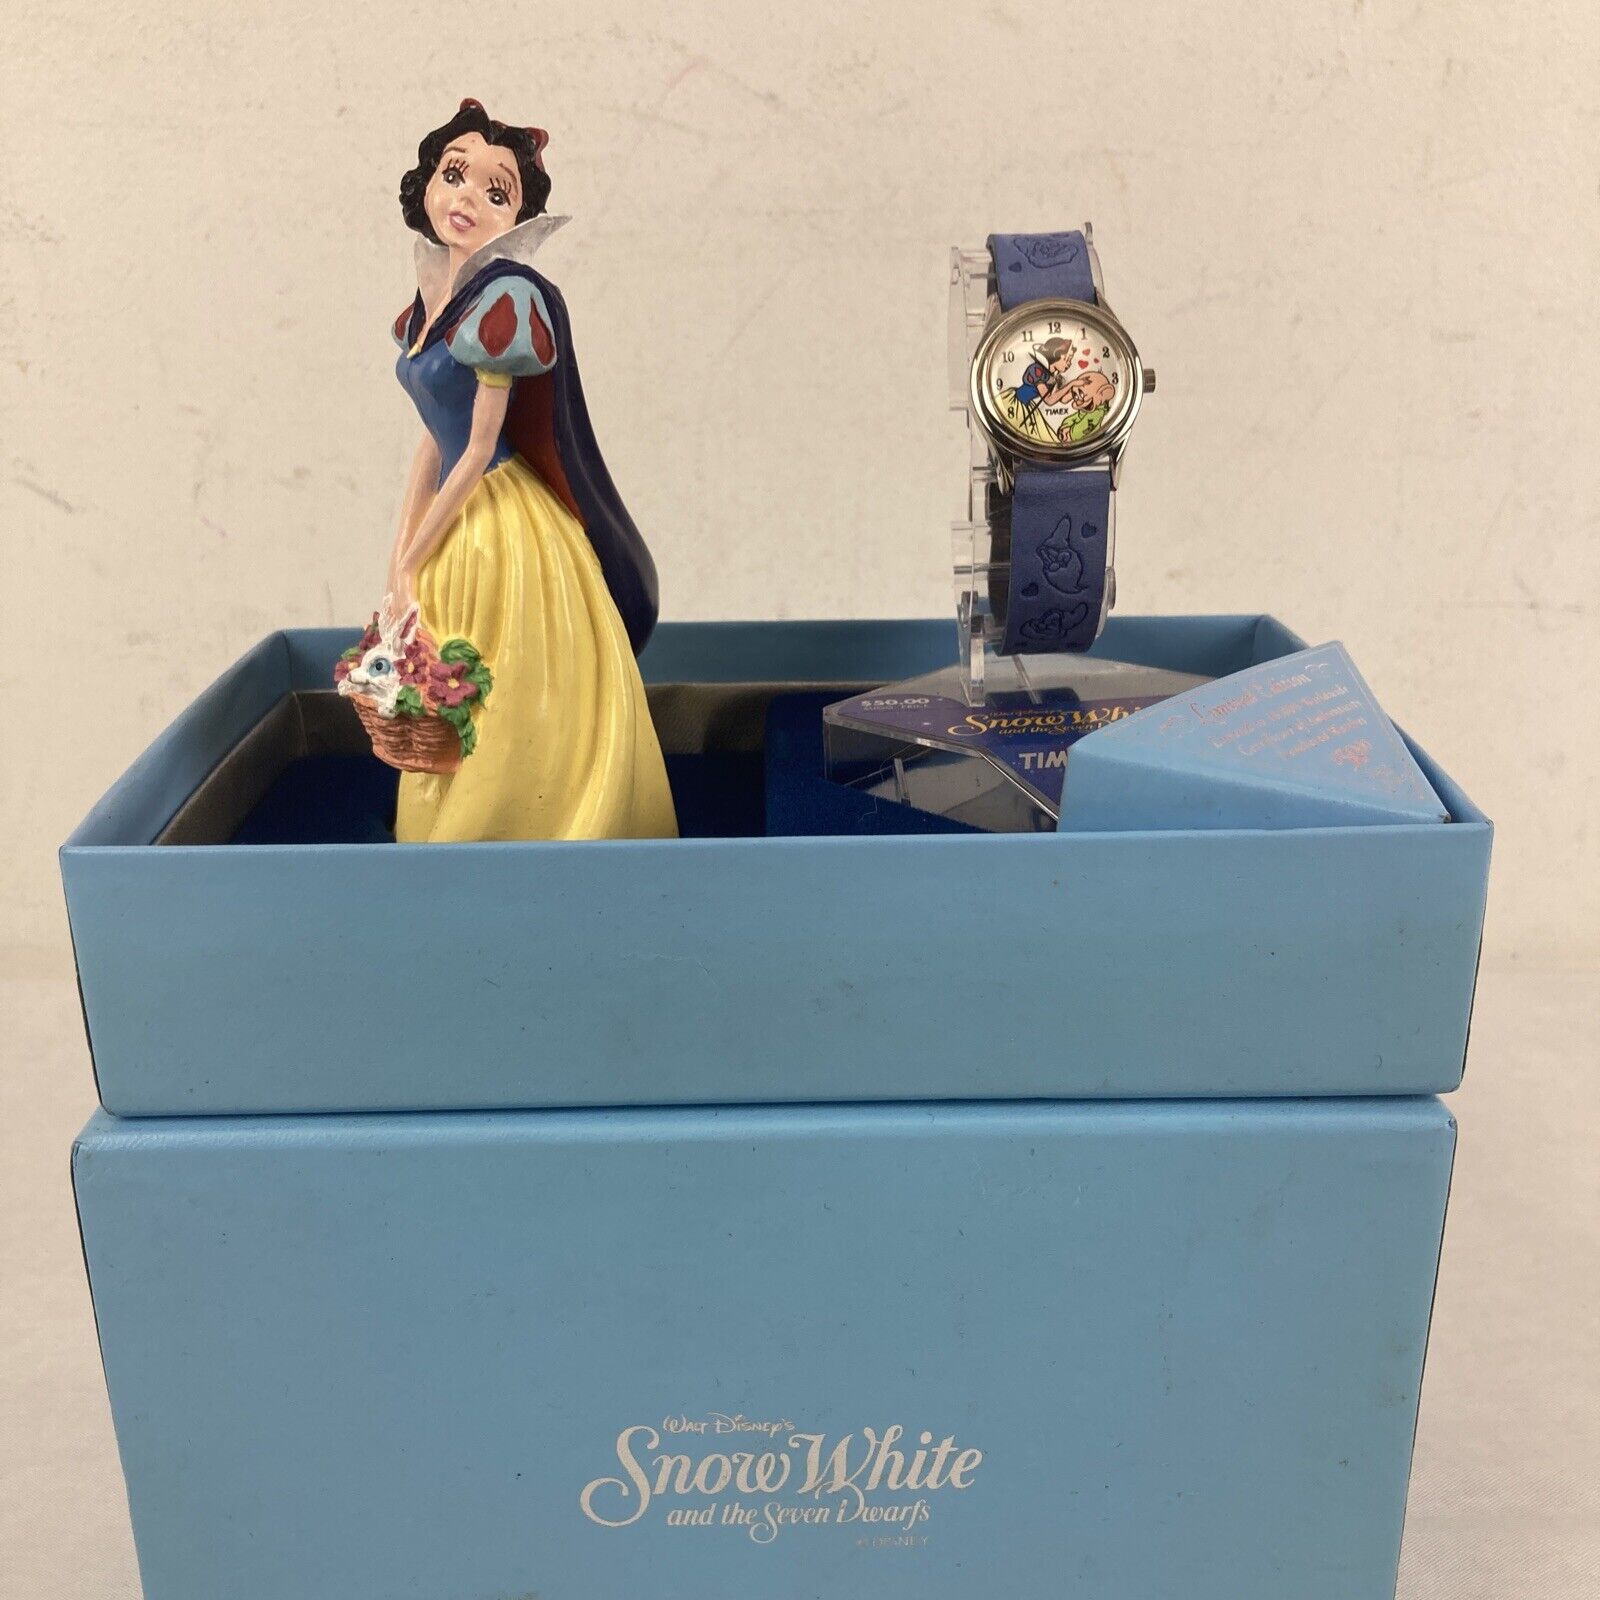 1993 Timex Limited Edition Snow White Figurine with Snow White & Dopey watch Set